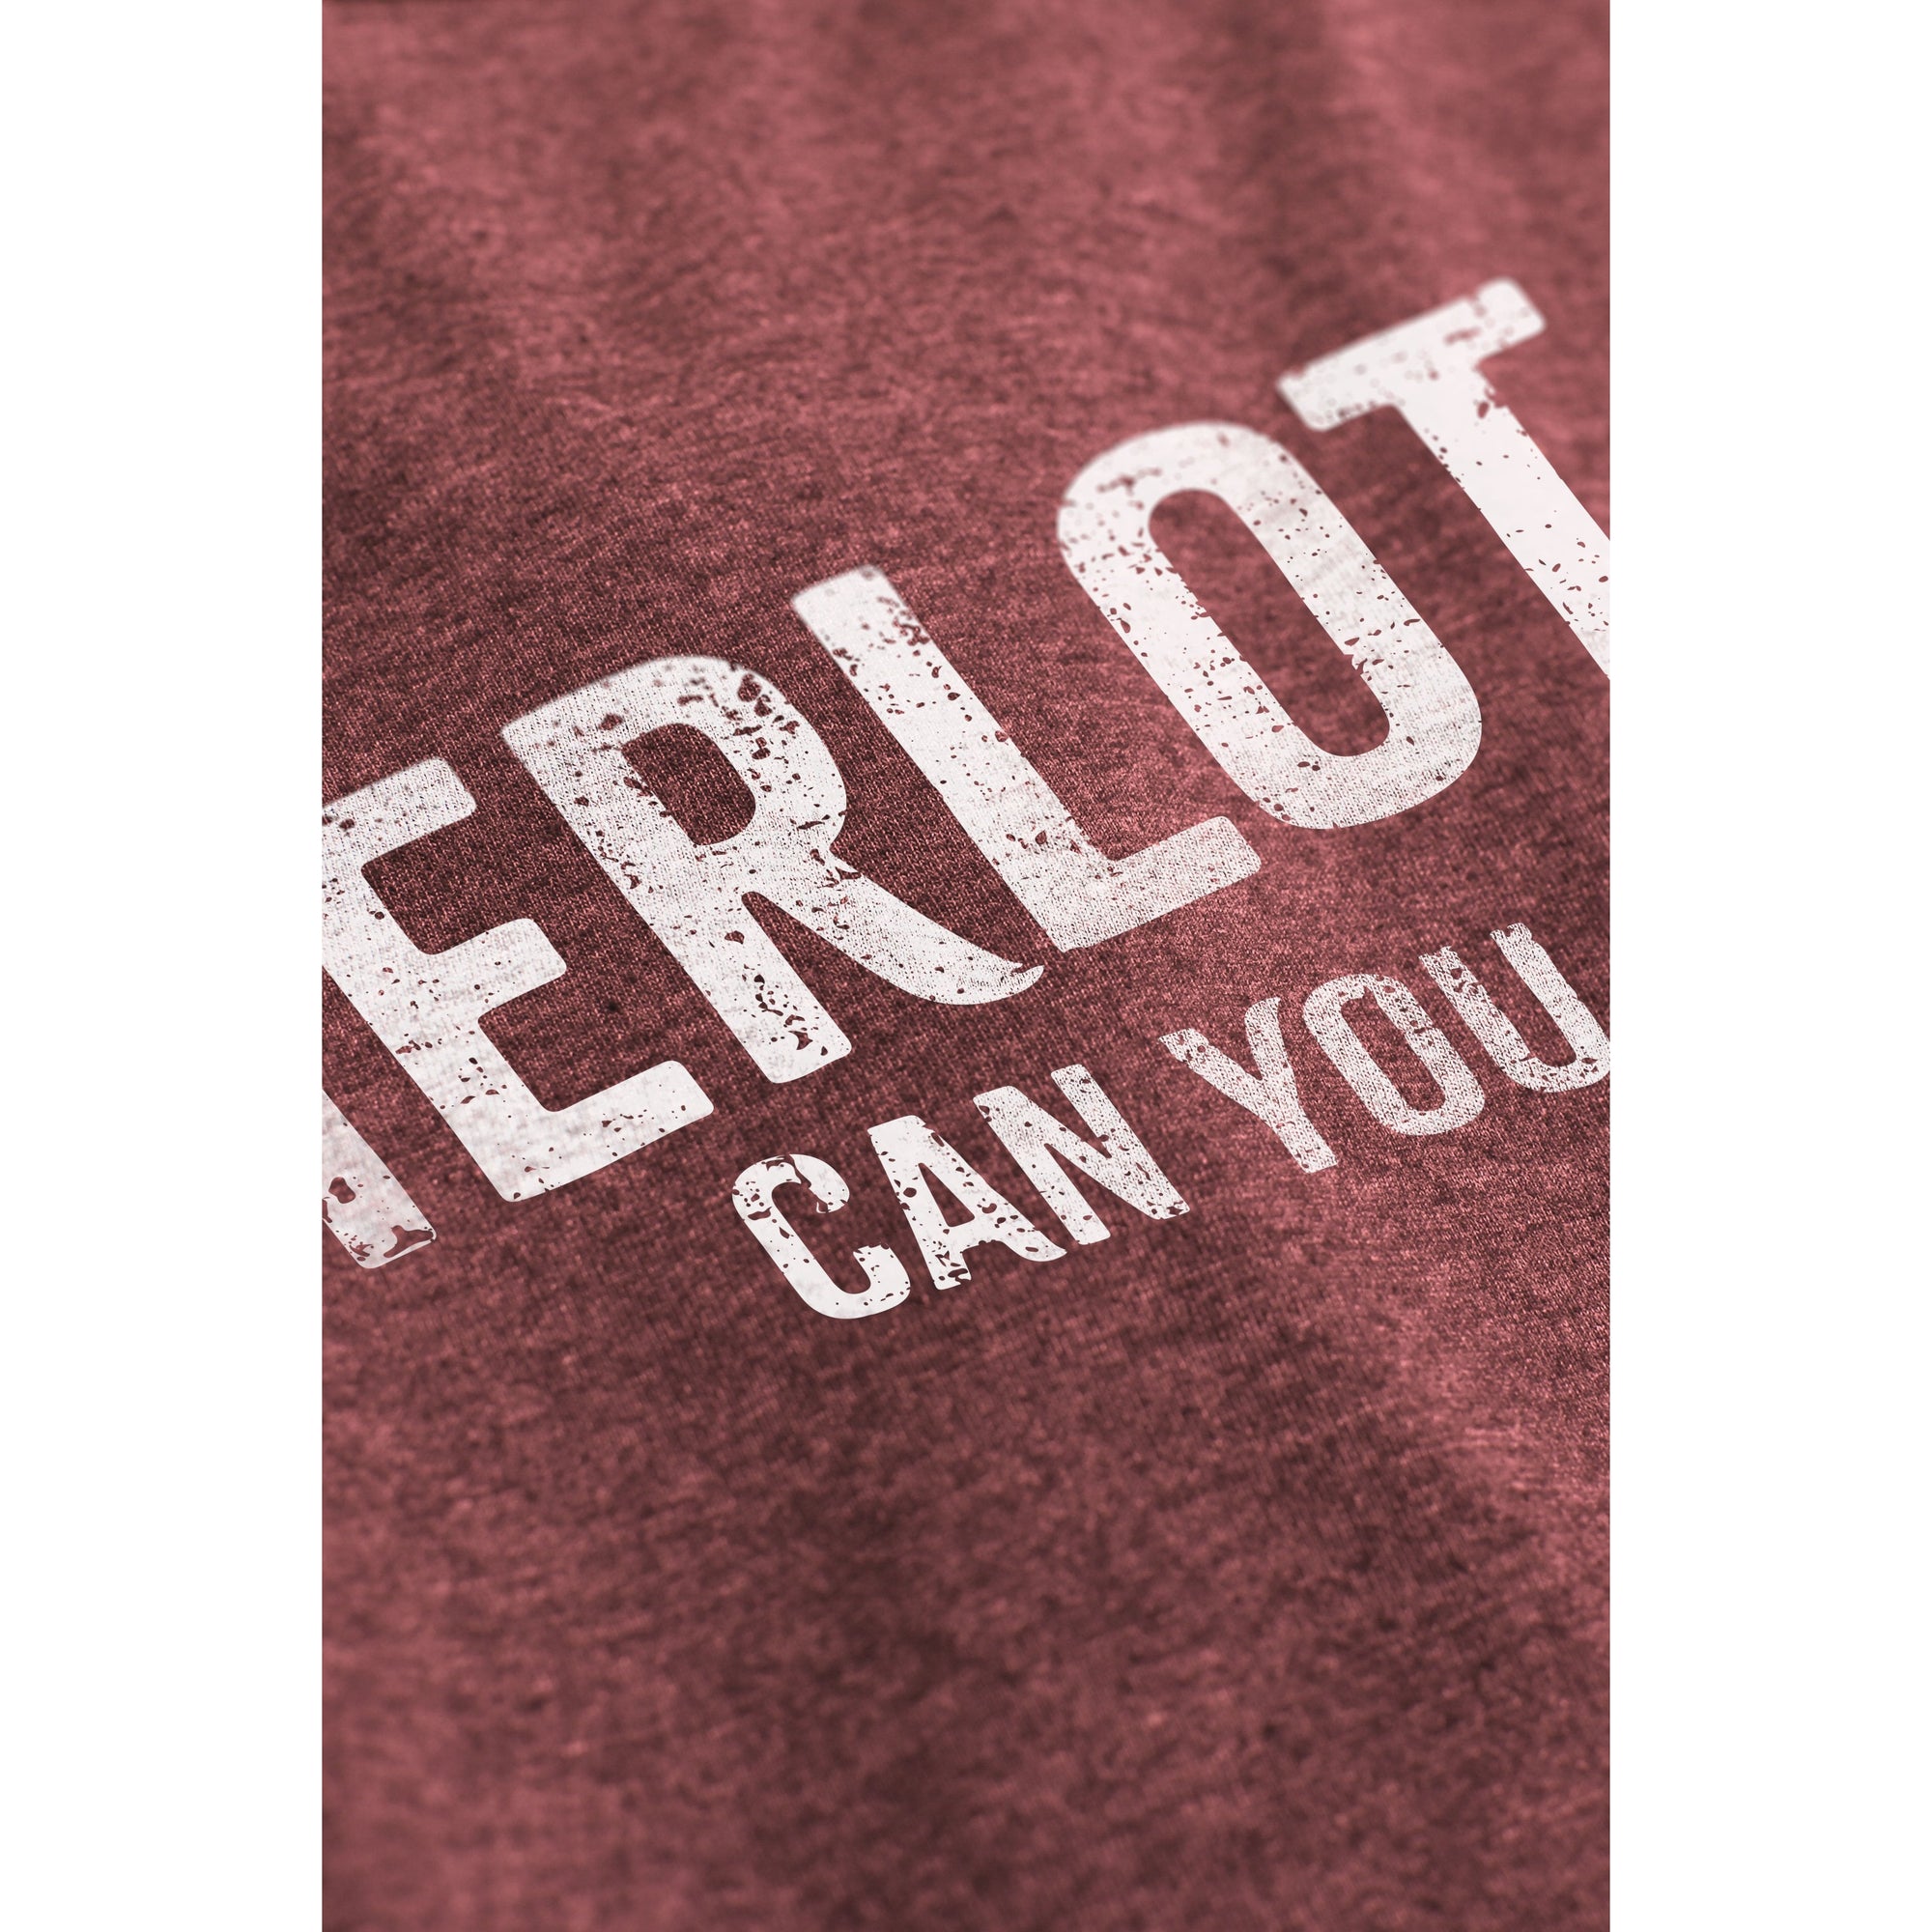 How Merlot Can You Go - Stories You Can Wear by Thread Tank